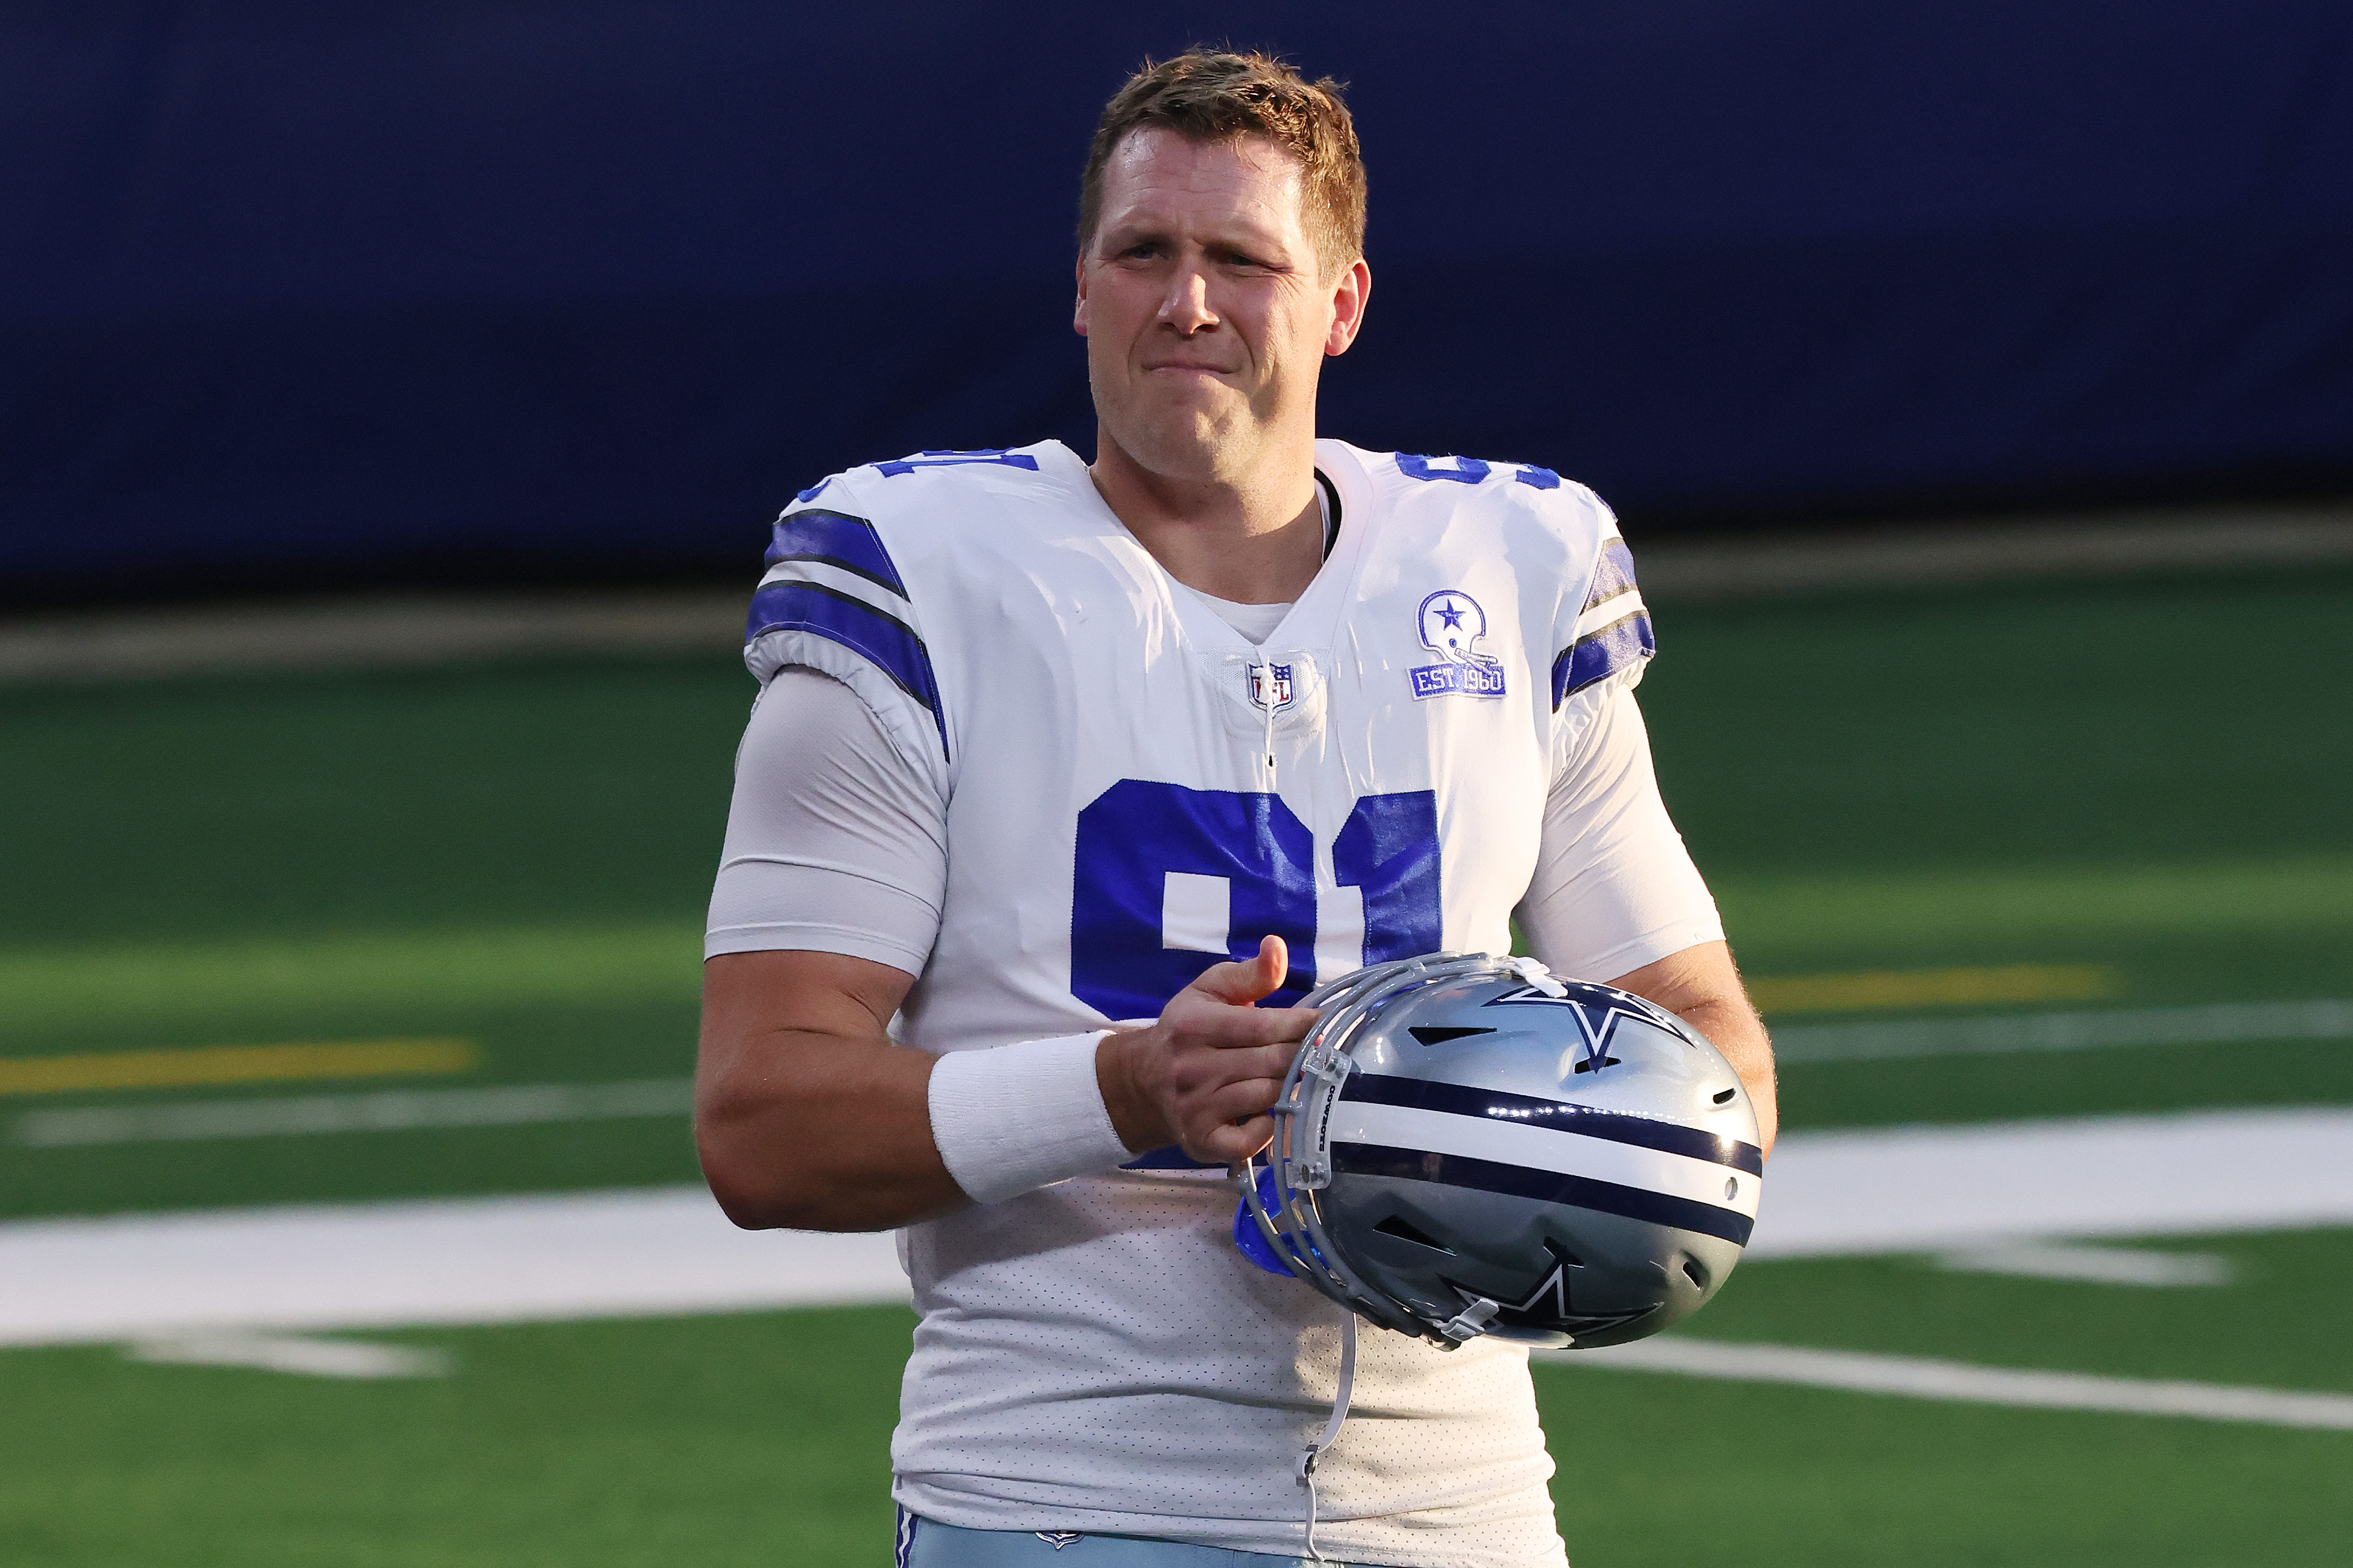 L.P. LaDouceur of the Dallas Cowboys looks on during warm-ups